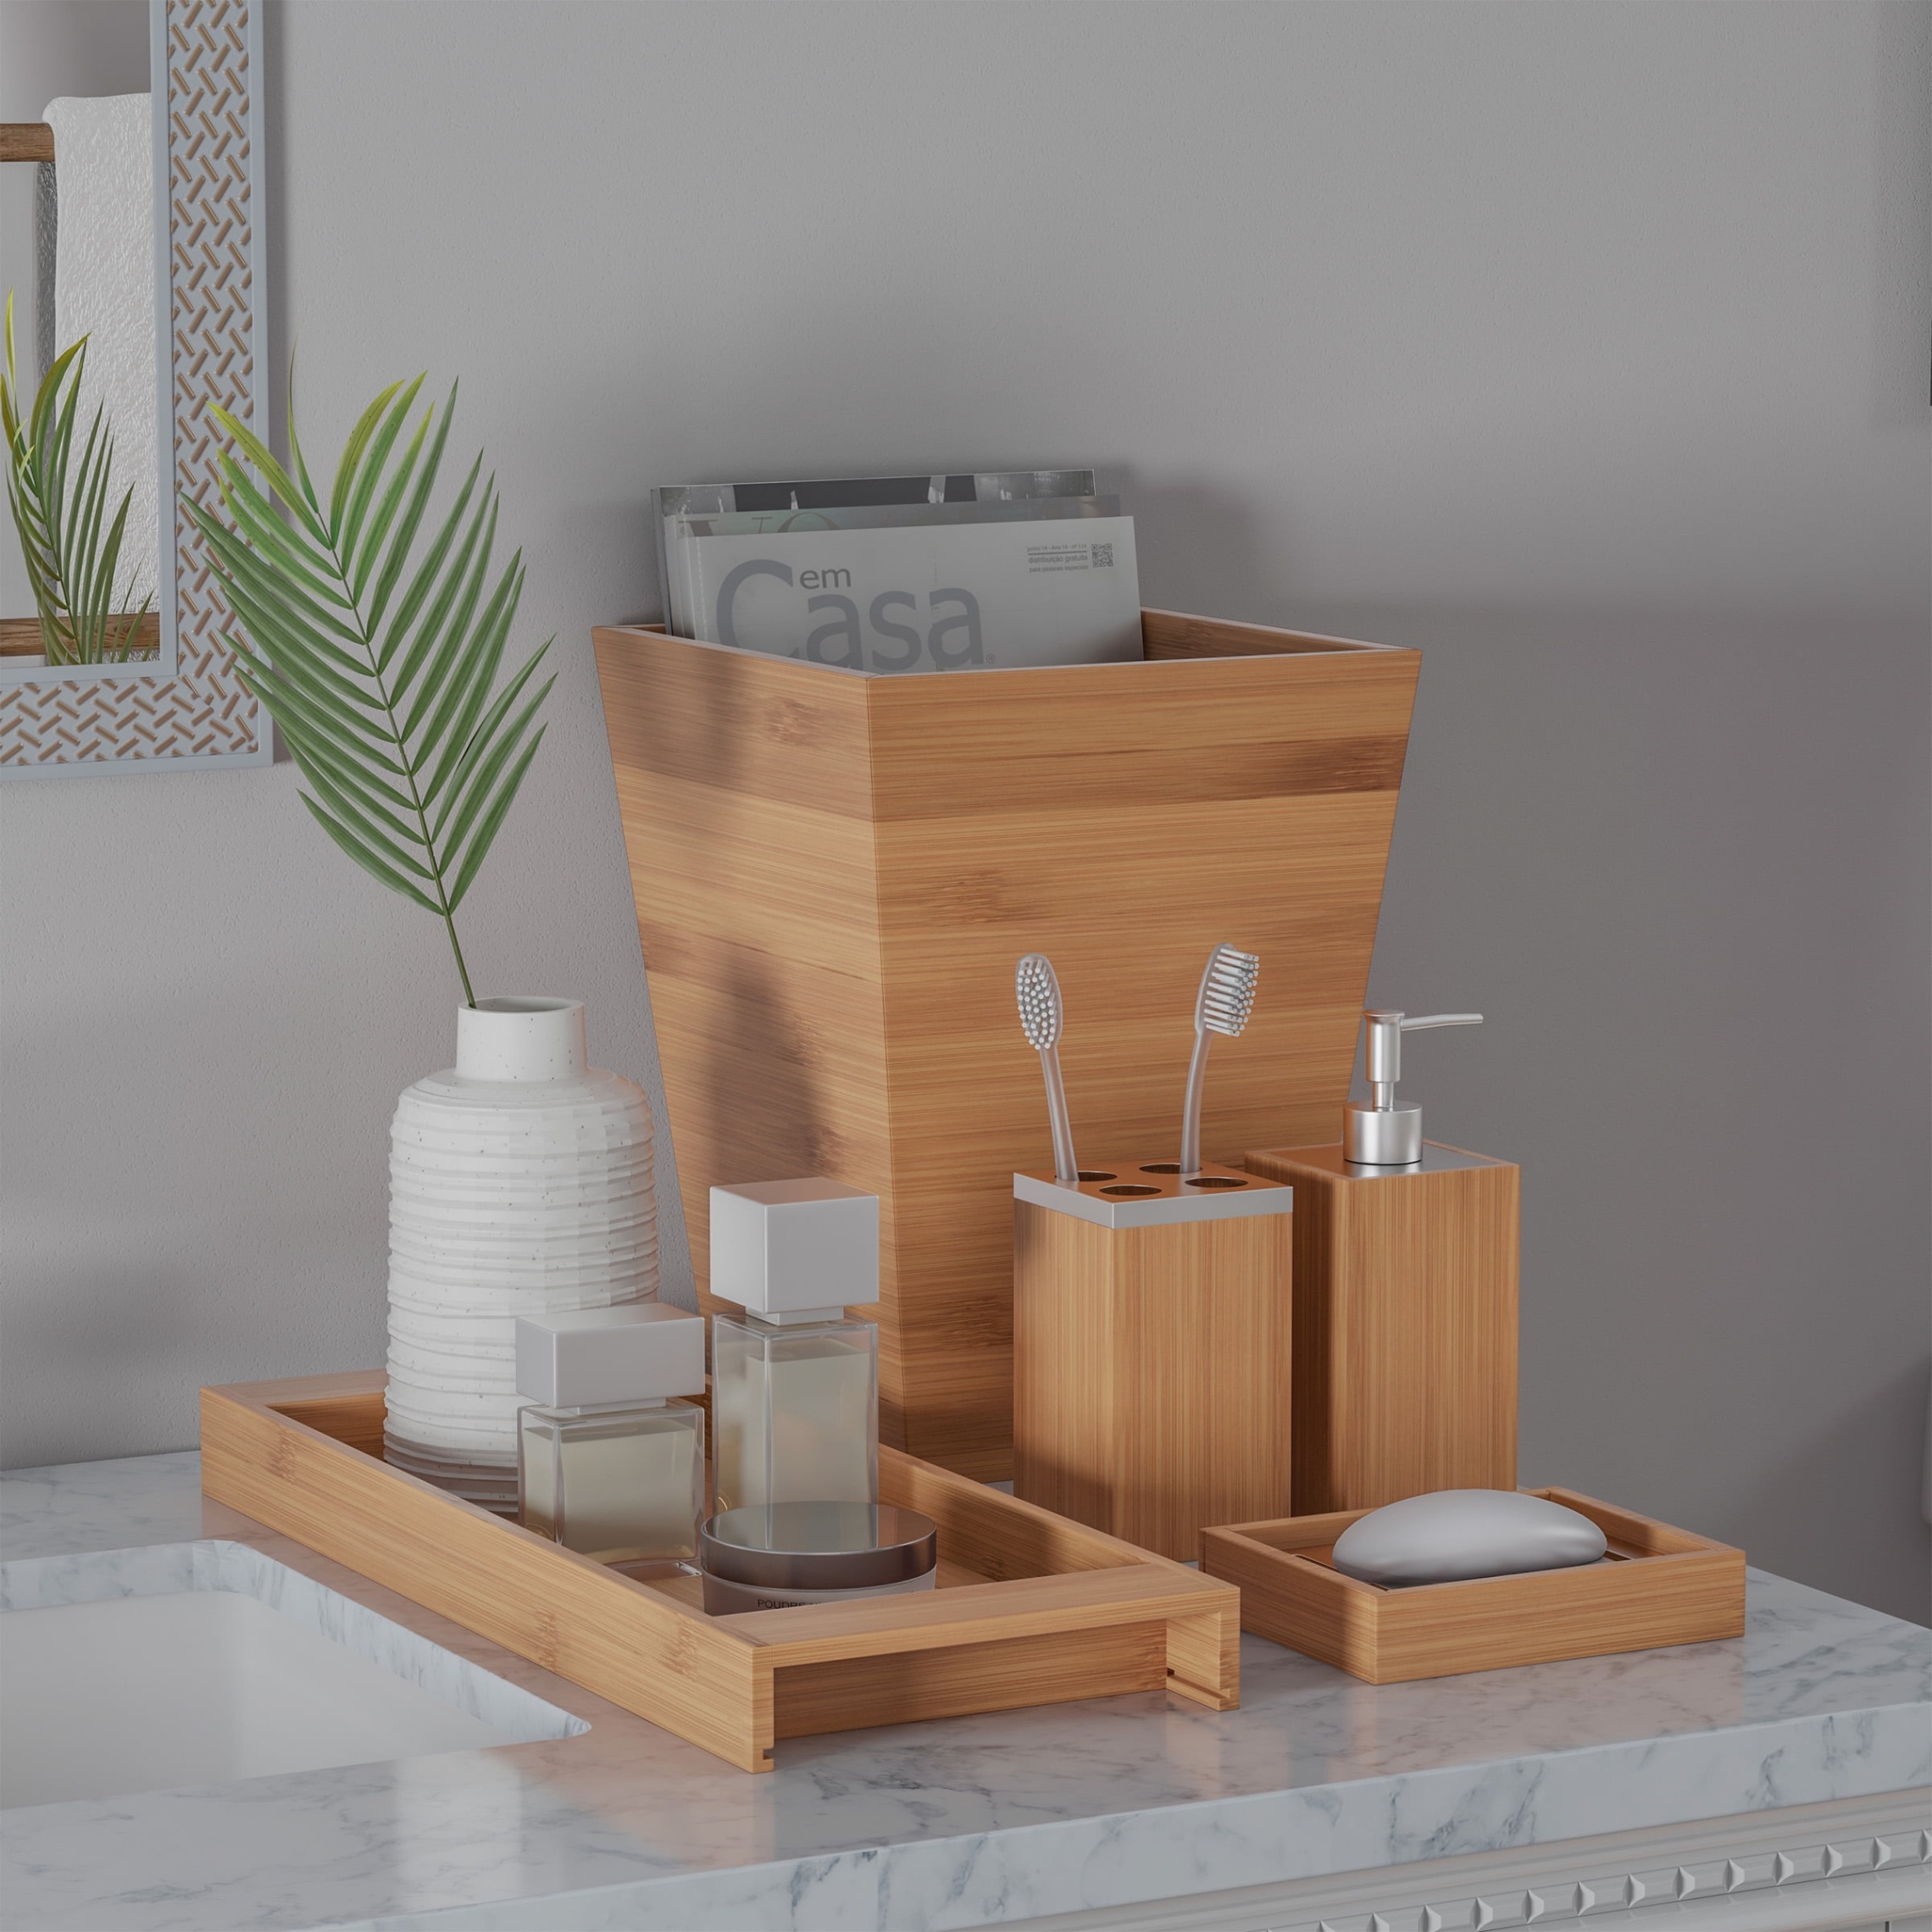 Upgrade Your Bathroom Game With This Stylish Accessories Set And Tray Combo